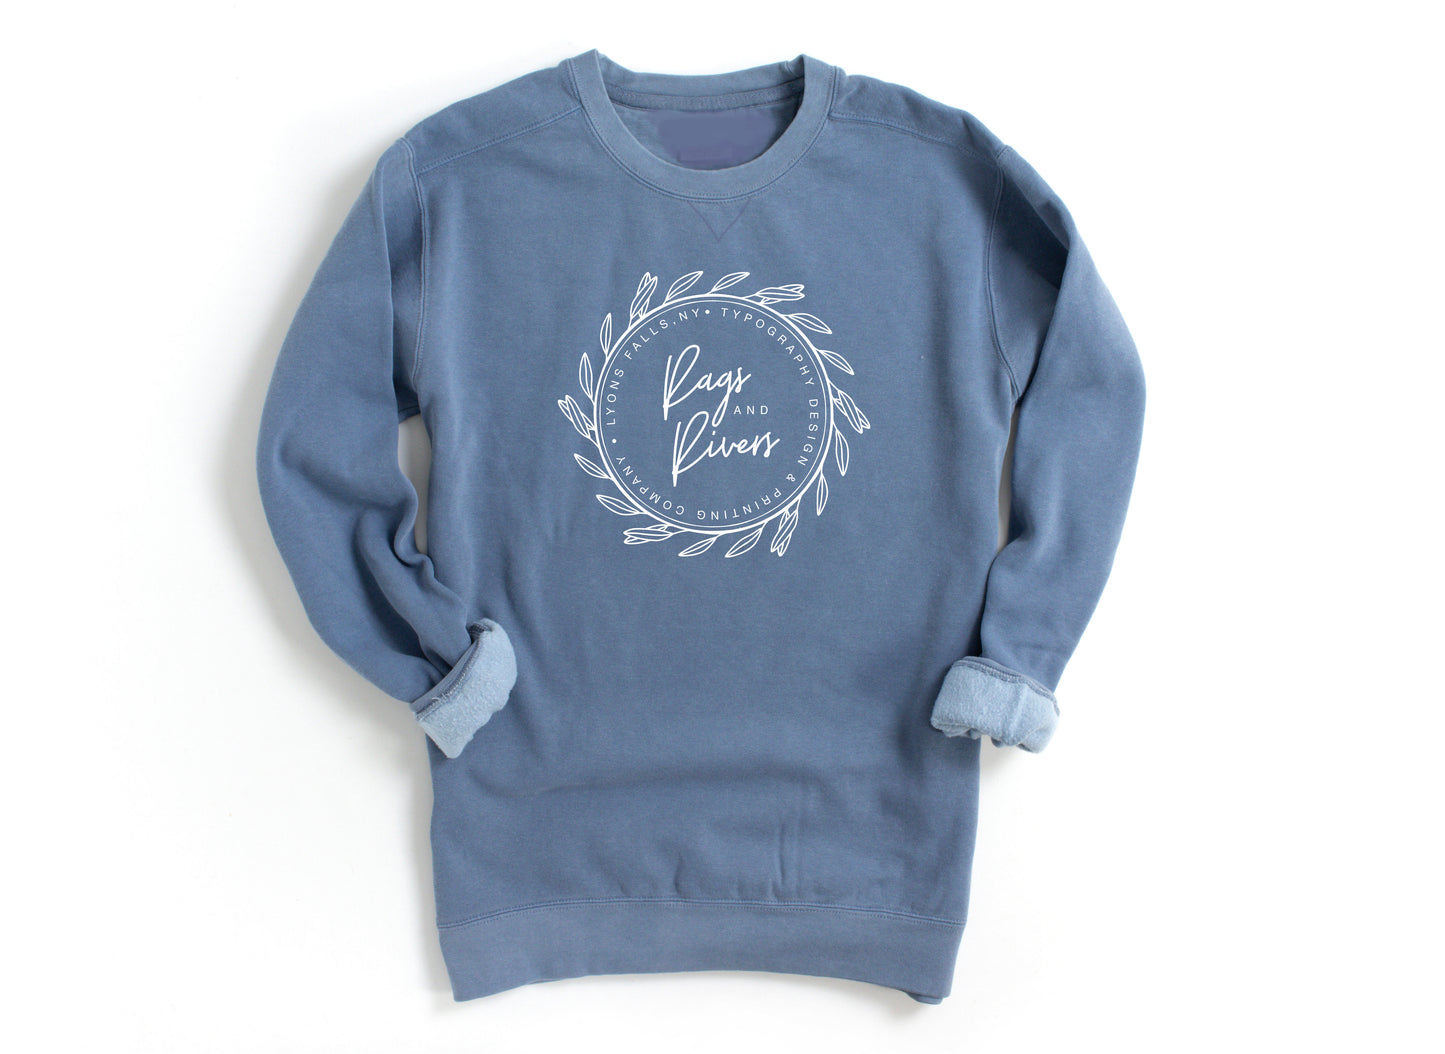 Rags and Rivers Branded Sweatshirt - Unisex Adults - Support Local